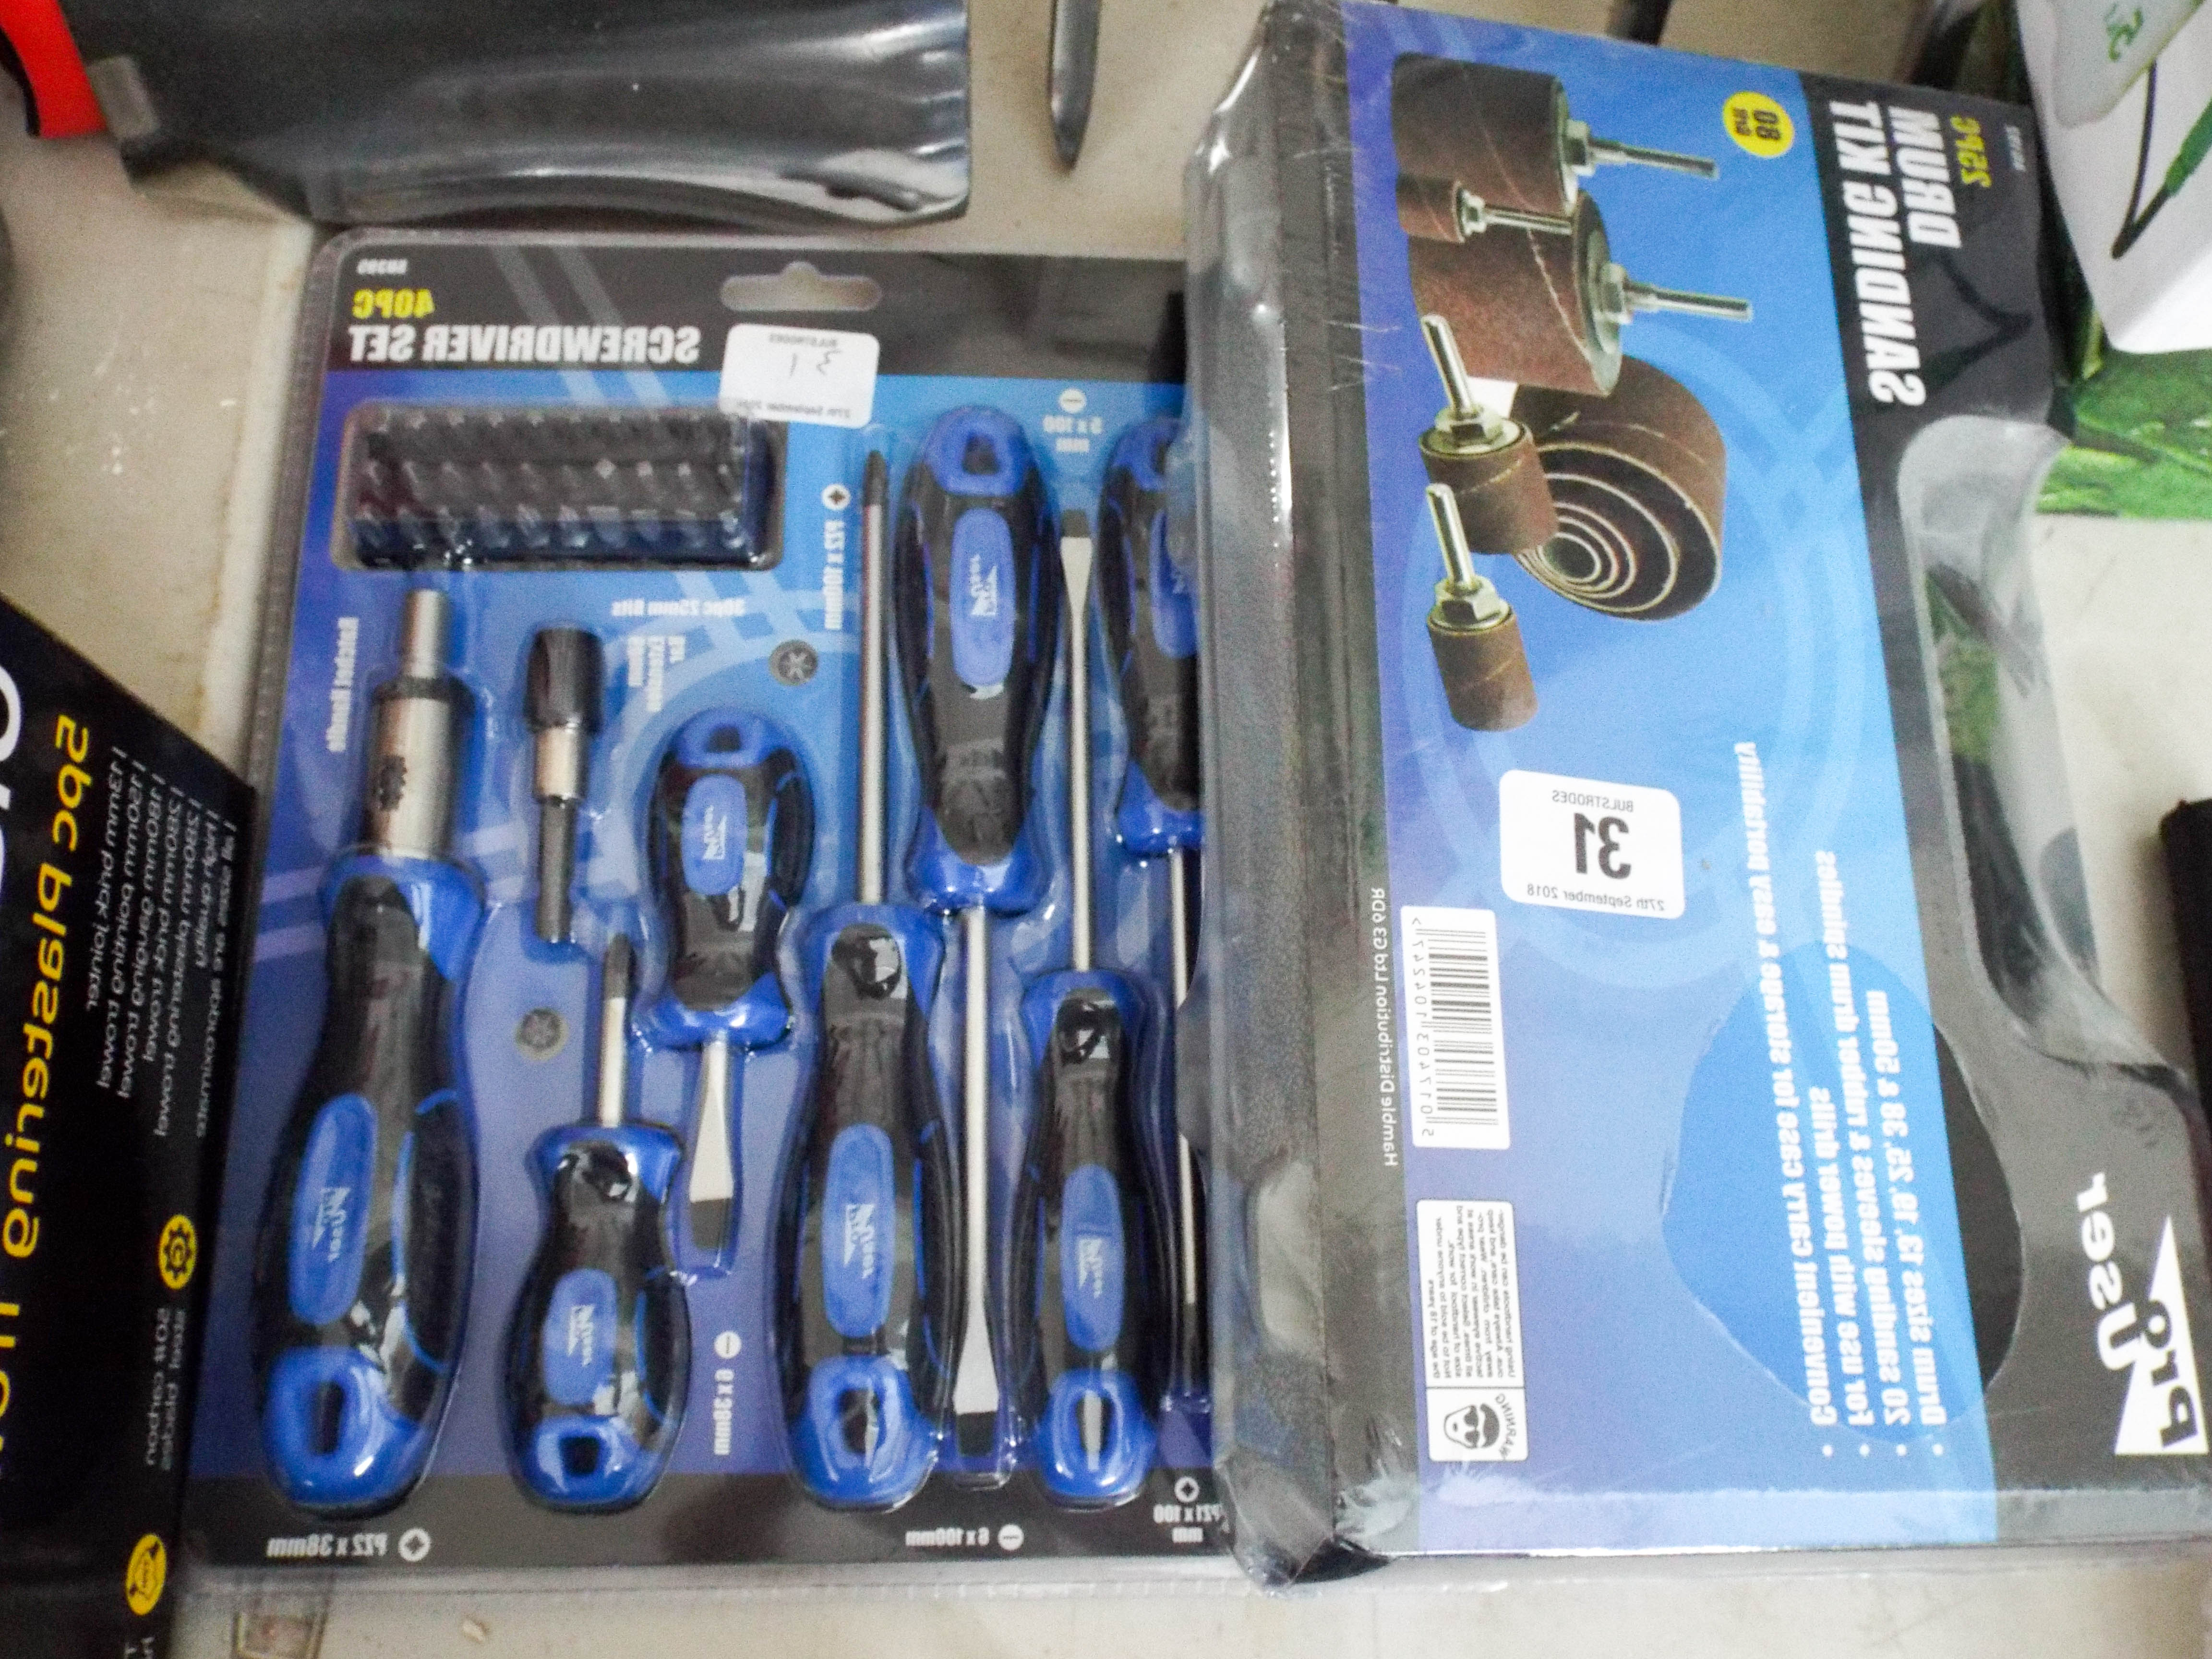 A new 40 piece screw driver set and a new 25 piece drum sanding kit